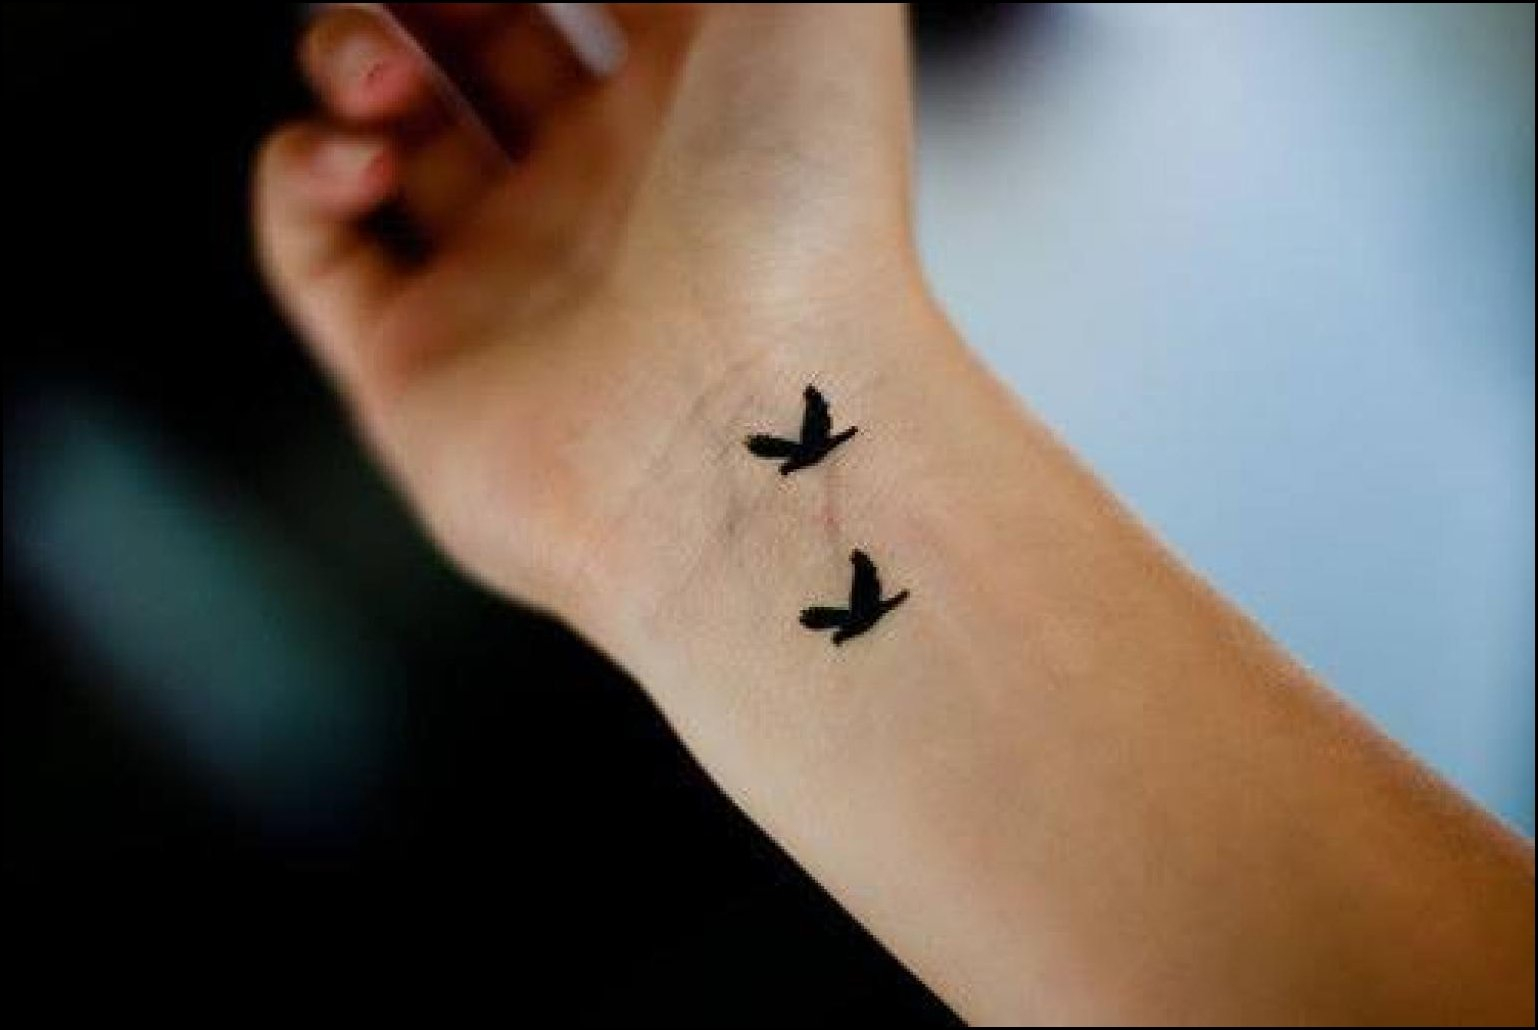 10 Small Subtle Tattoo Ideas That May Interest You Read Scoops within sizing 1538 X 1030